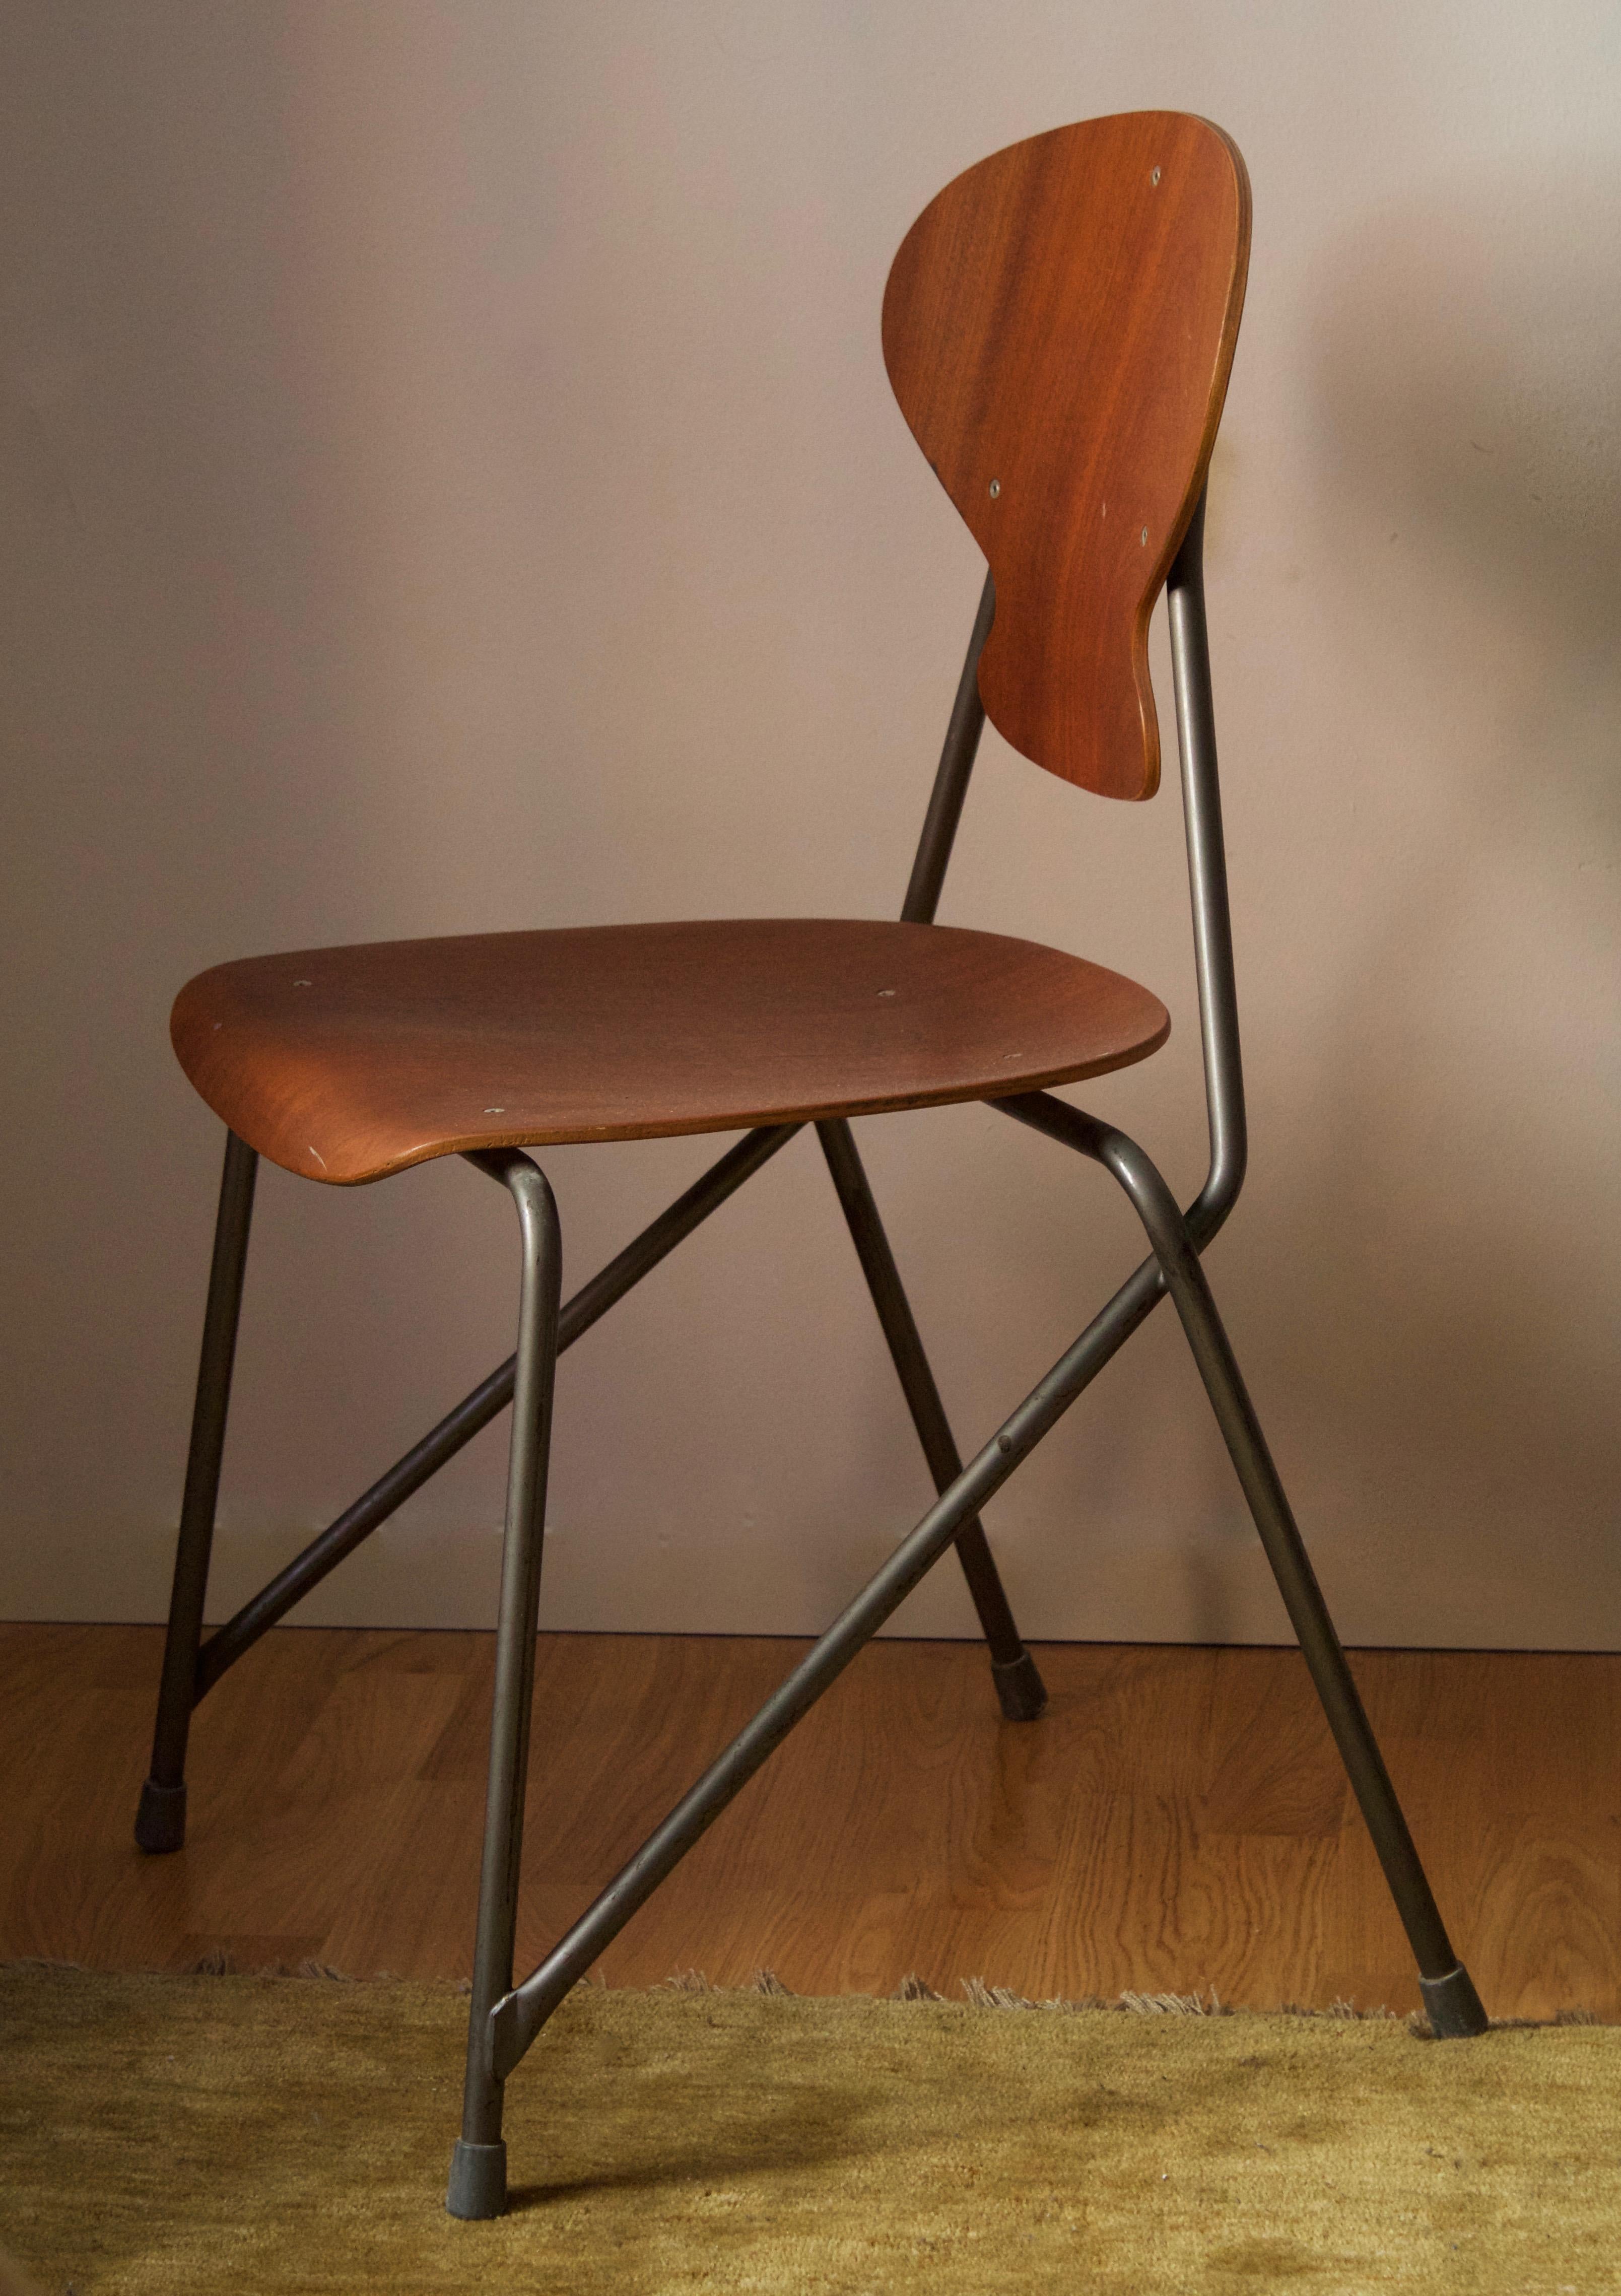 A chair designed by important Danish architect Steen Eiler Rasmussen in partnership with product designer Kai Lyngfeldt Larsen. Designed for Rasmussens Rungsted Skole in 1954. Produced by Danbork.

Example from the original interior.